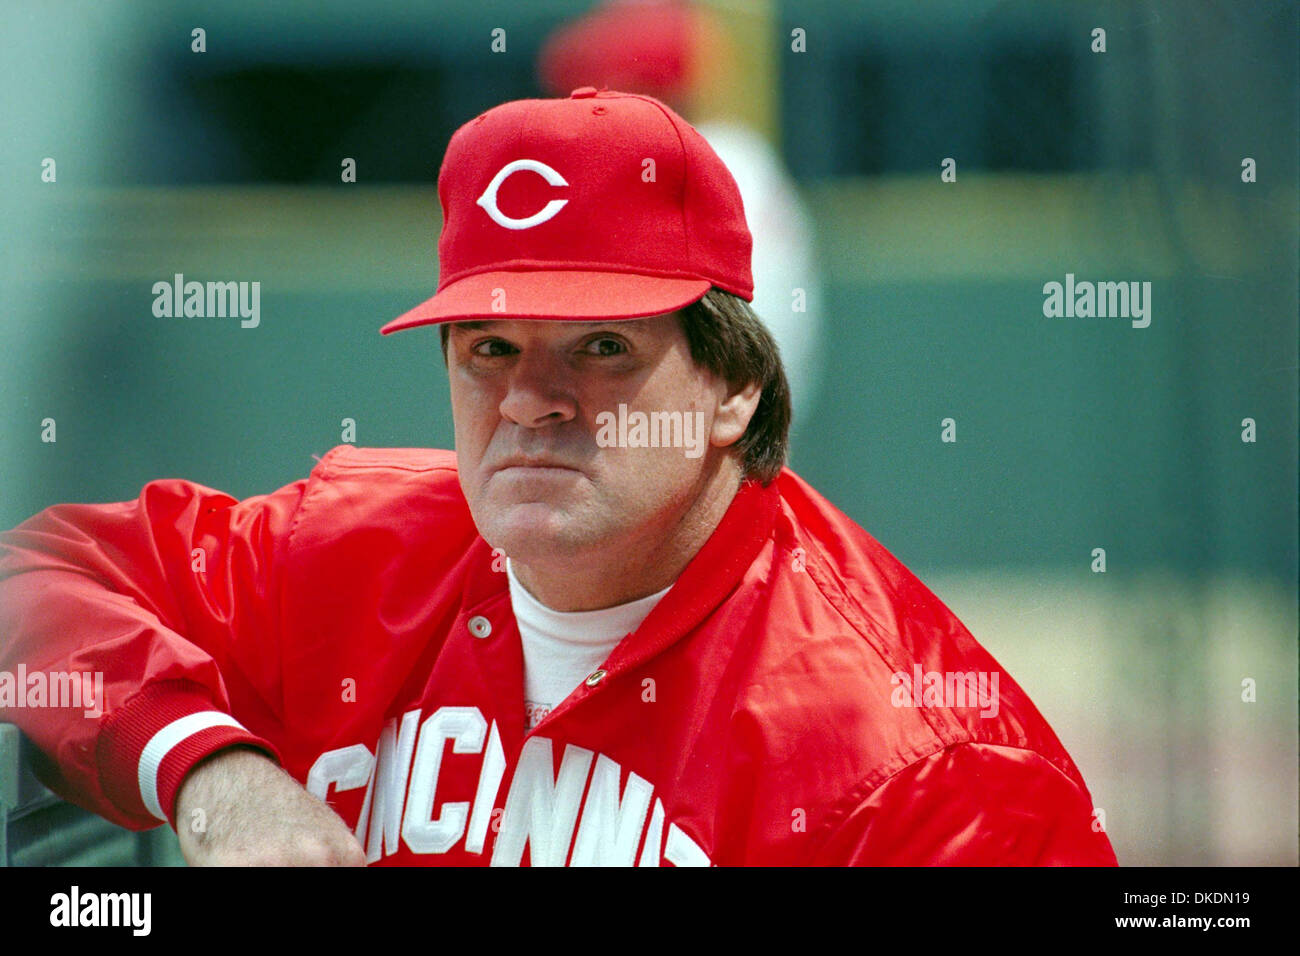 Mar 15, 2007 - Cincinnati, OH, USA - MLB career hits leader Pete Rose was  banned from baseball for life after being convicted of betting on baseball  while he was manager of